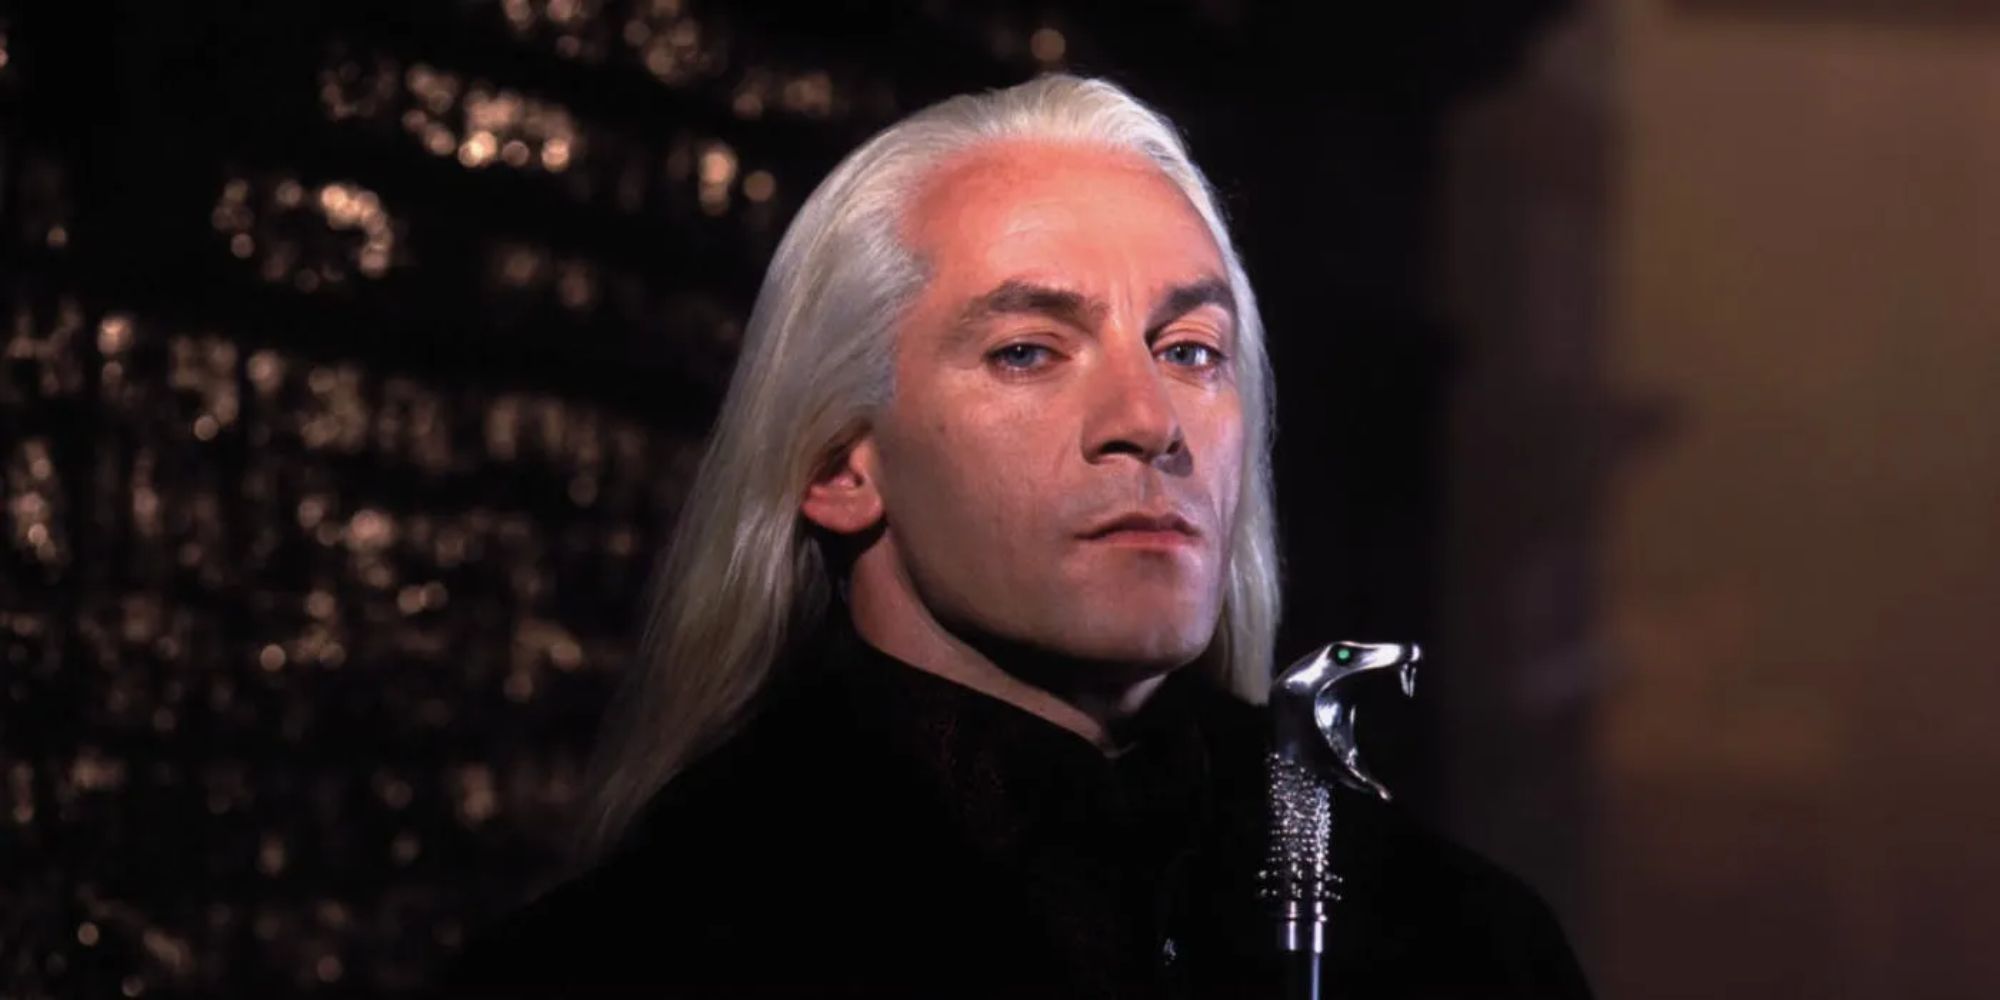 Lucius Malfoy lurks in the shadows, holding his famous snake-headed wand case